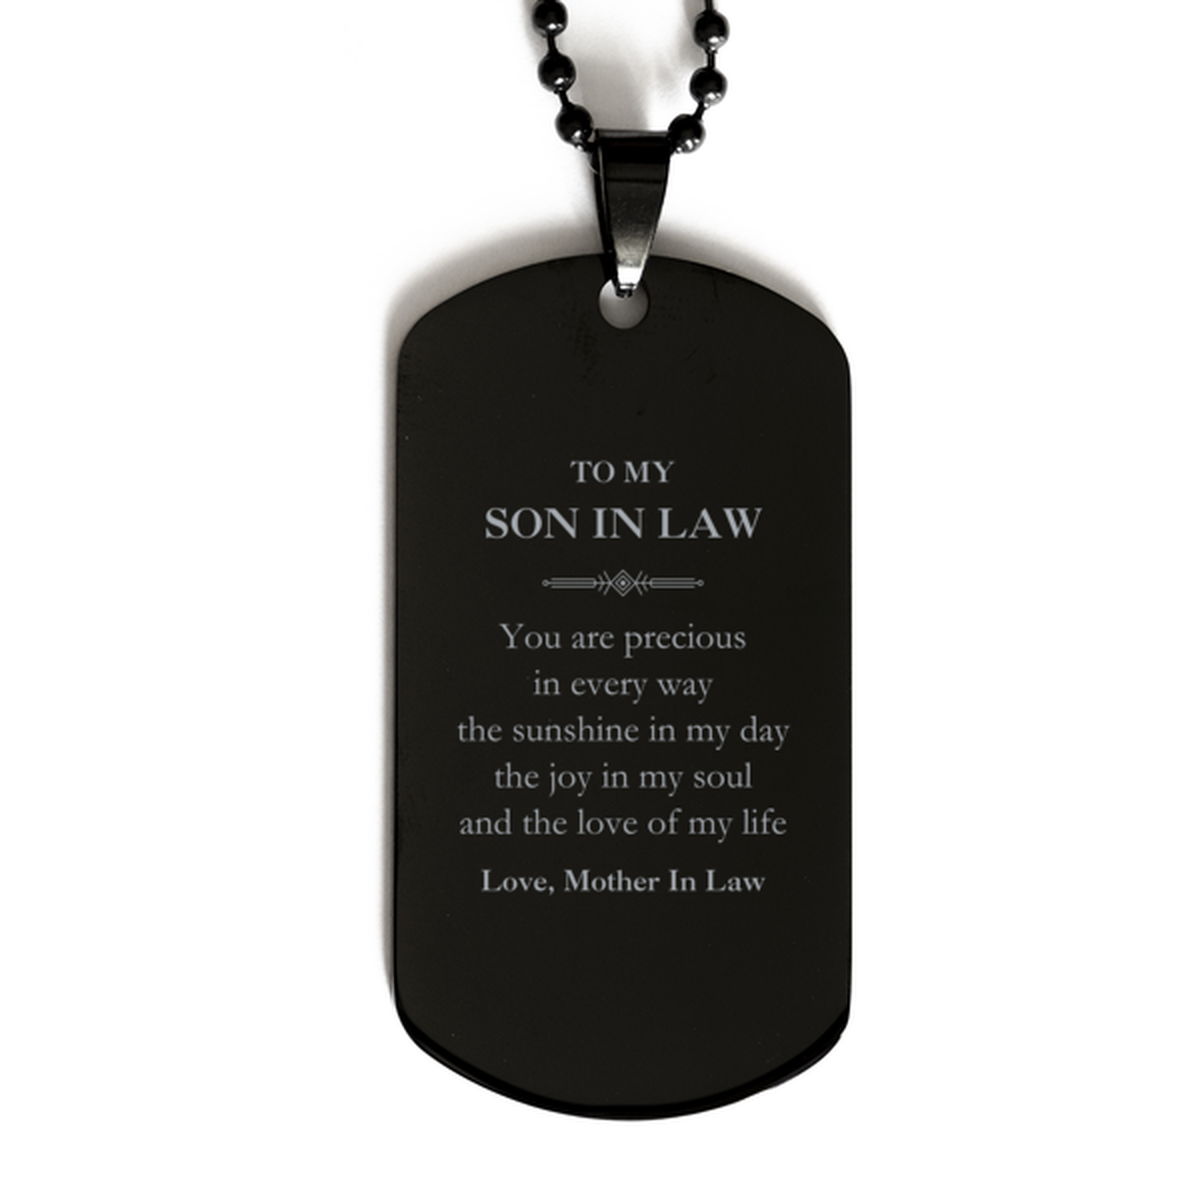 Graduation Gifts for Son In Law Black Dog Tag Present from Mother In Law, Christmas Son In Law Birthday Gifts Son In Law You are precious in every way the sunshine in my day. Love, Mother In Law